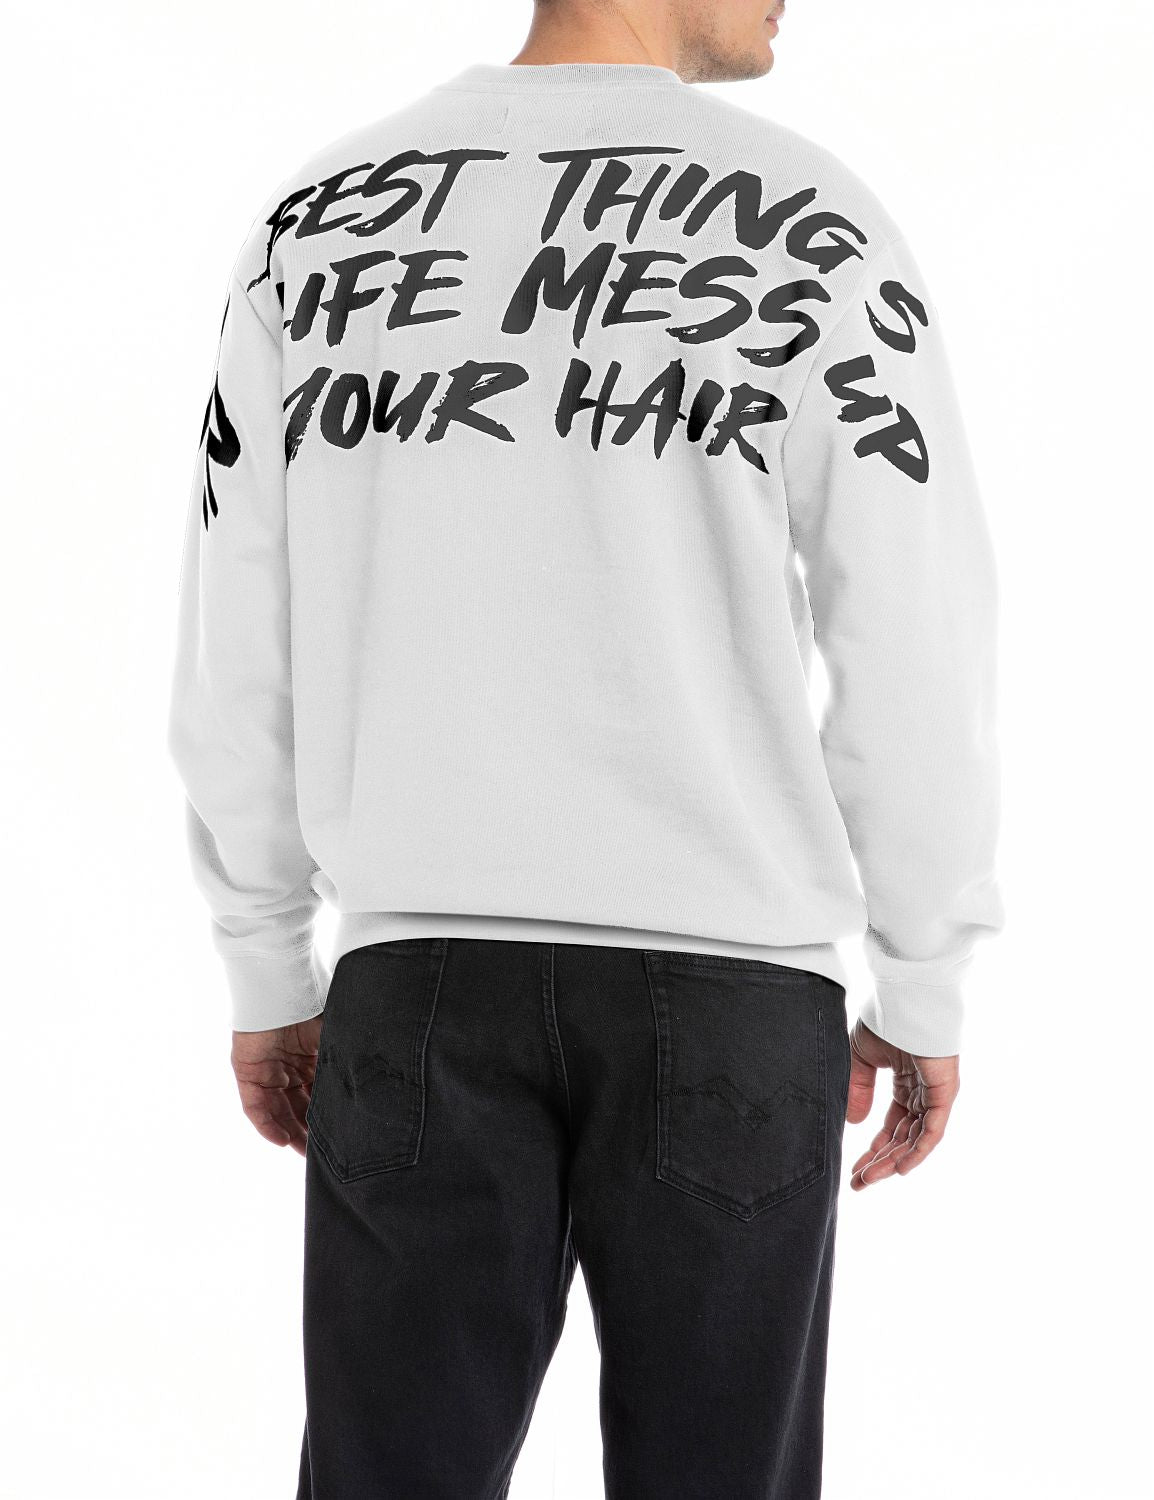 Relaxed Fit Crewneck Sweatshirt with Print